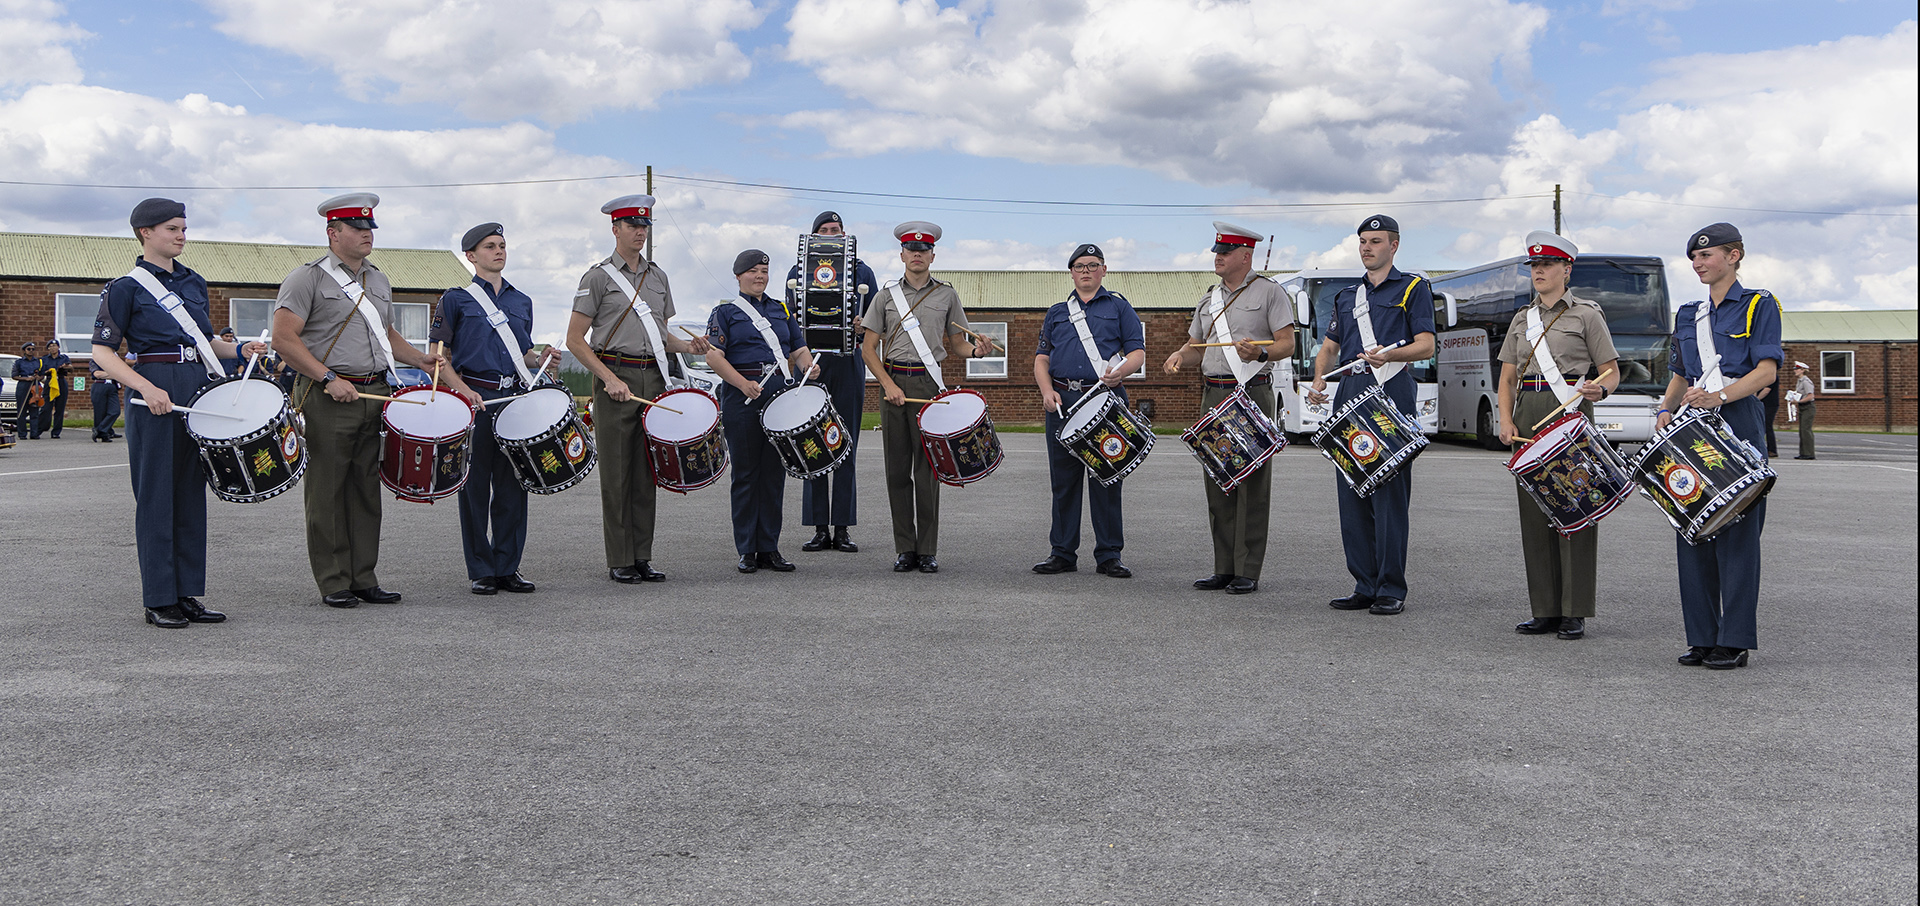 RAF Air Cadets musicians with RM Band members